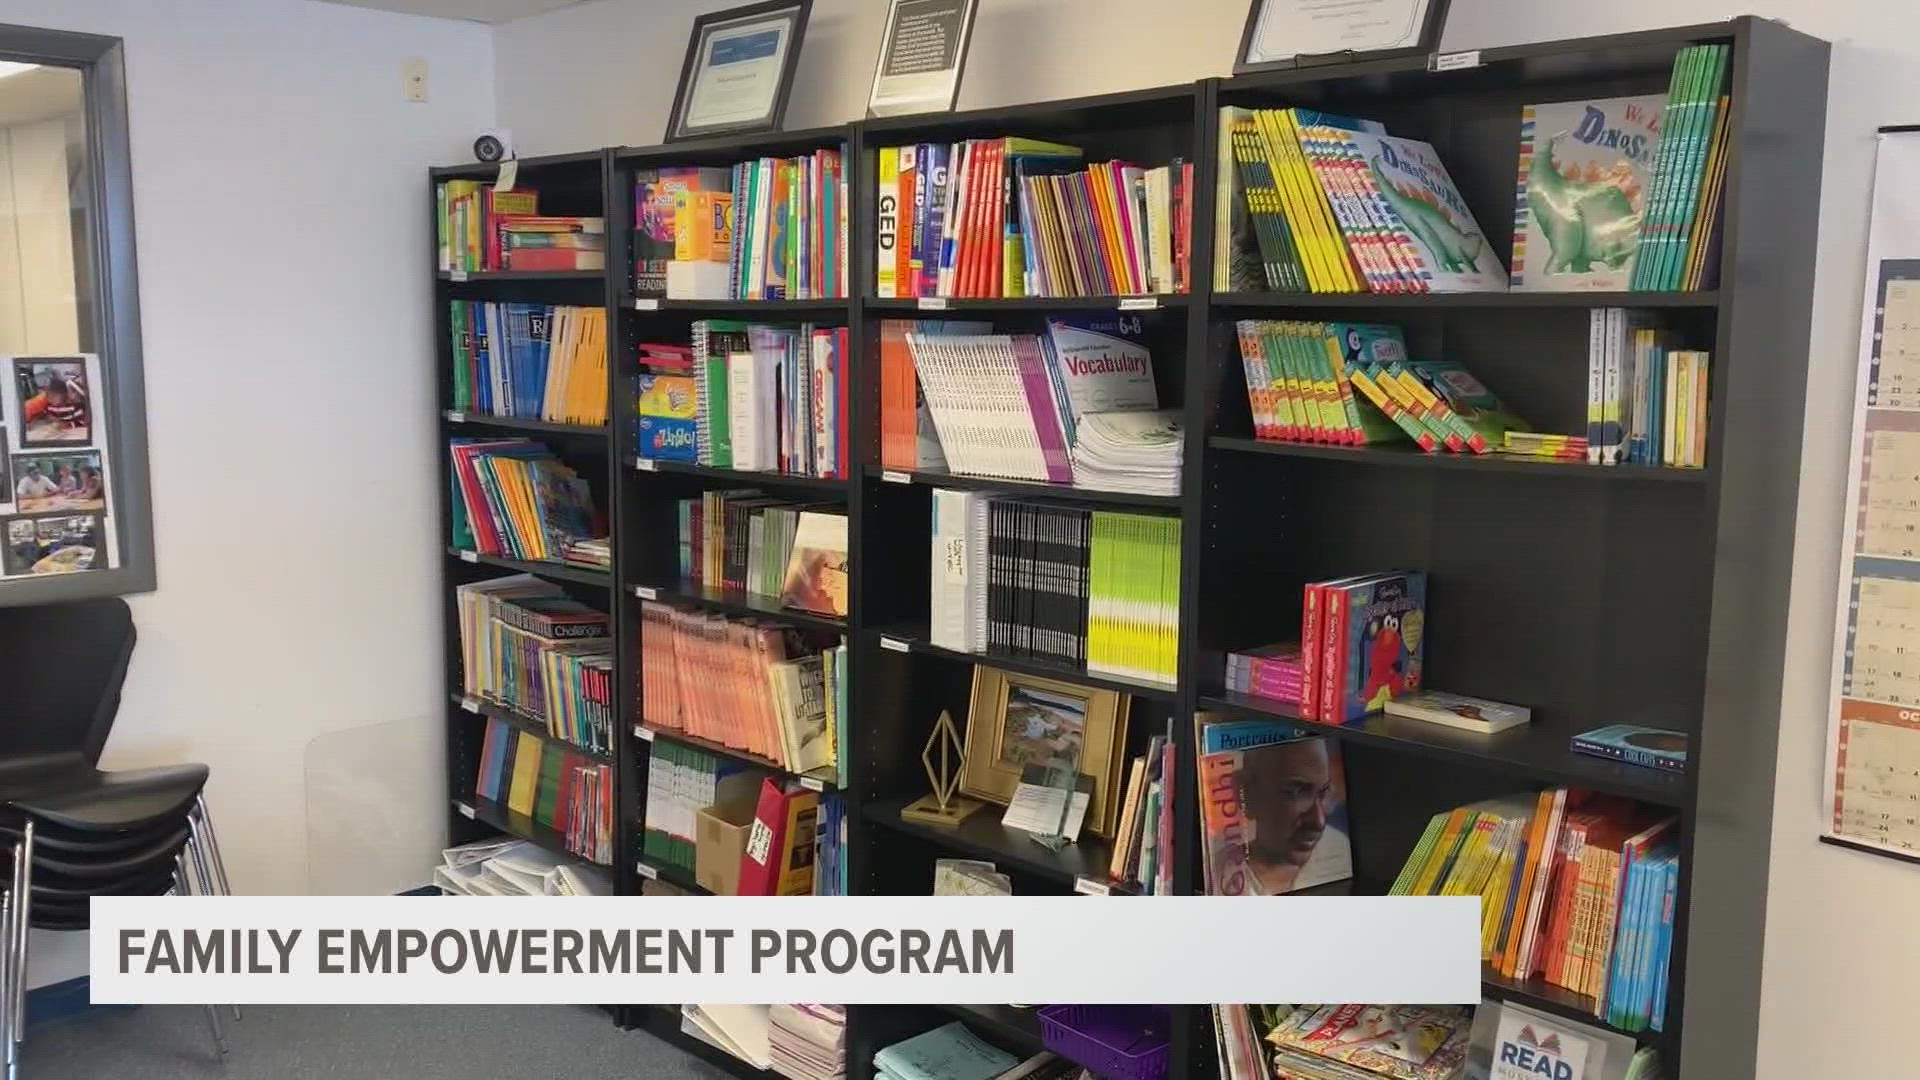 Muskegon Heights-based literacy organization Muskegon Reads will debut a comprehensive new literacy initiative dubbed 'the Family Empowerment Program' in April.